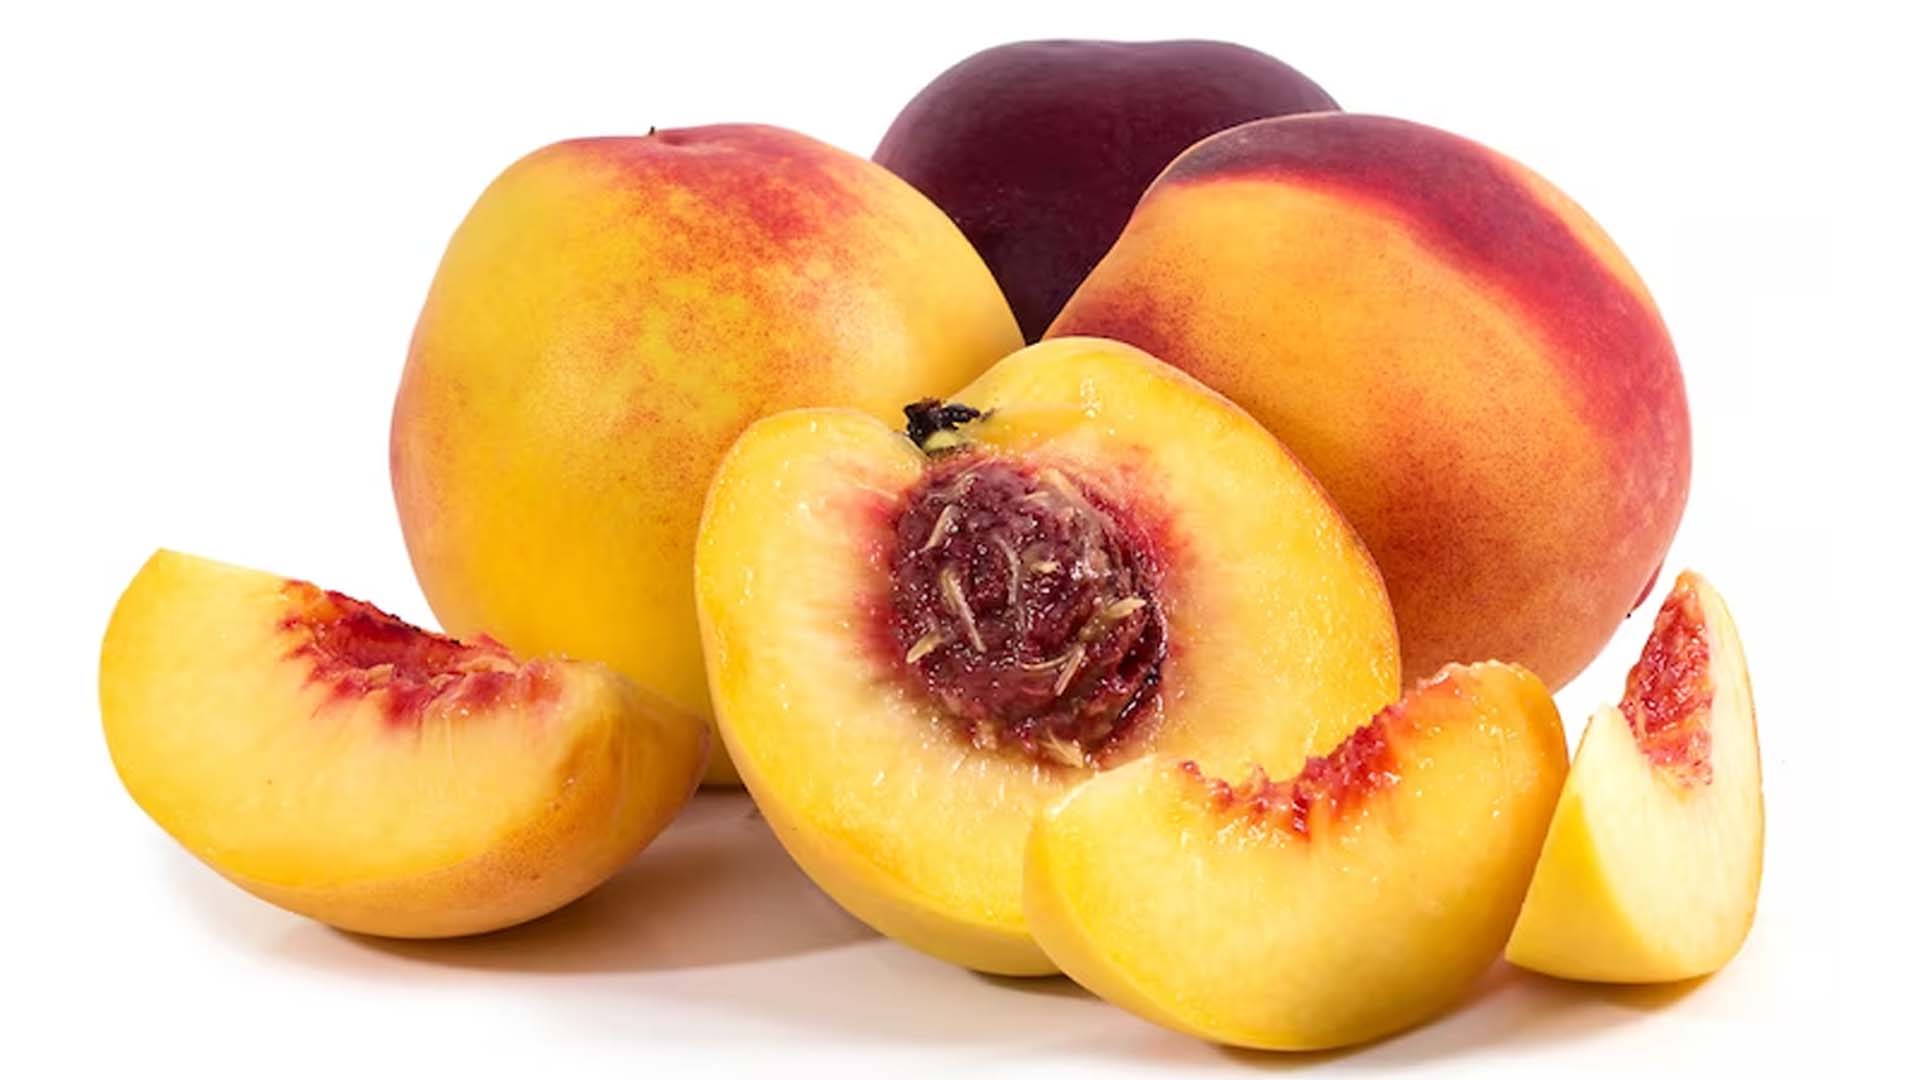 Nutritional values and health benefits of peaches